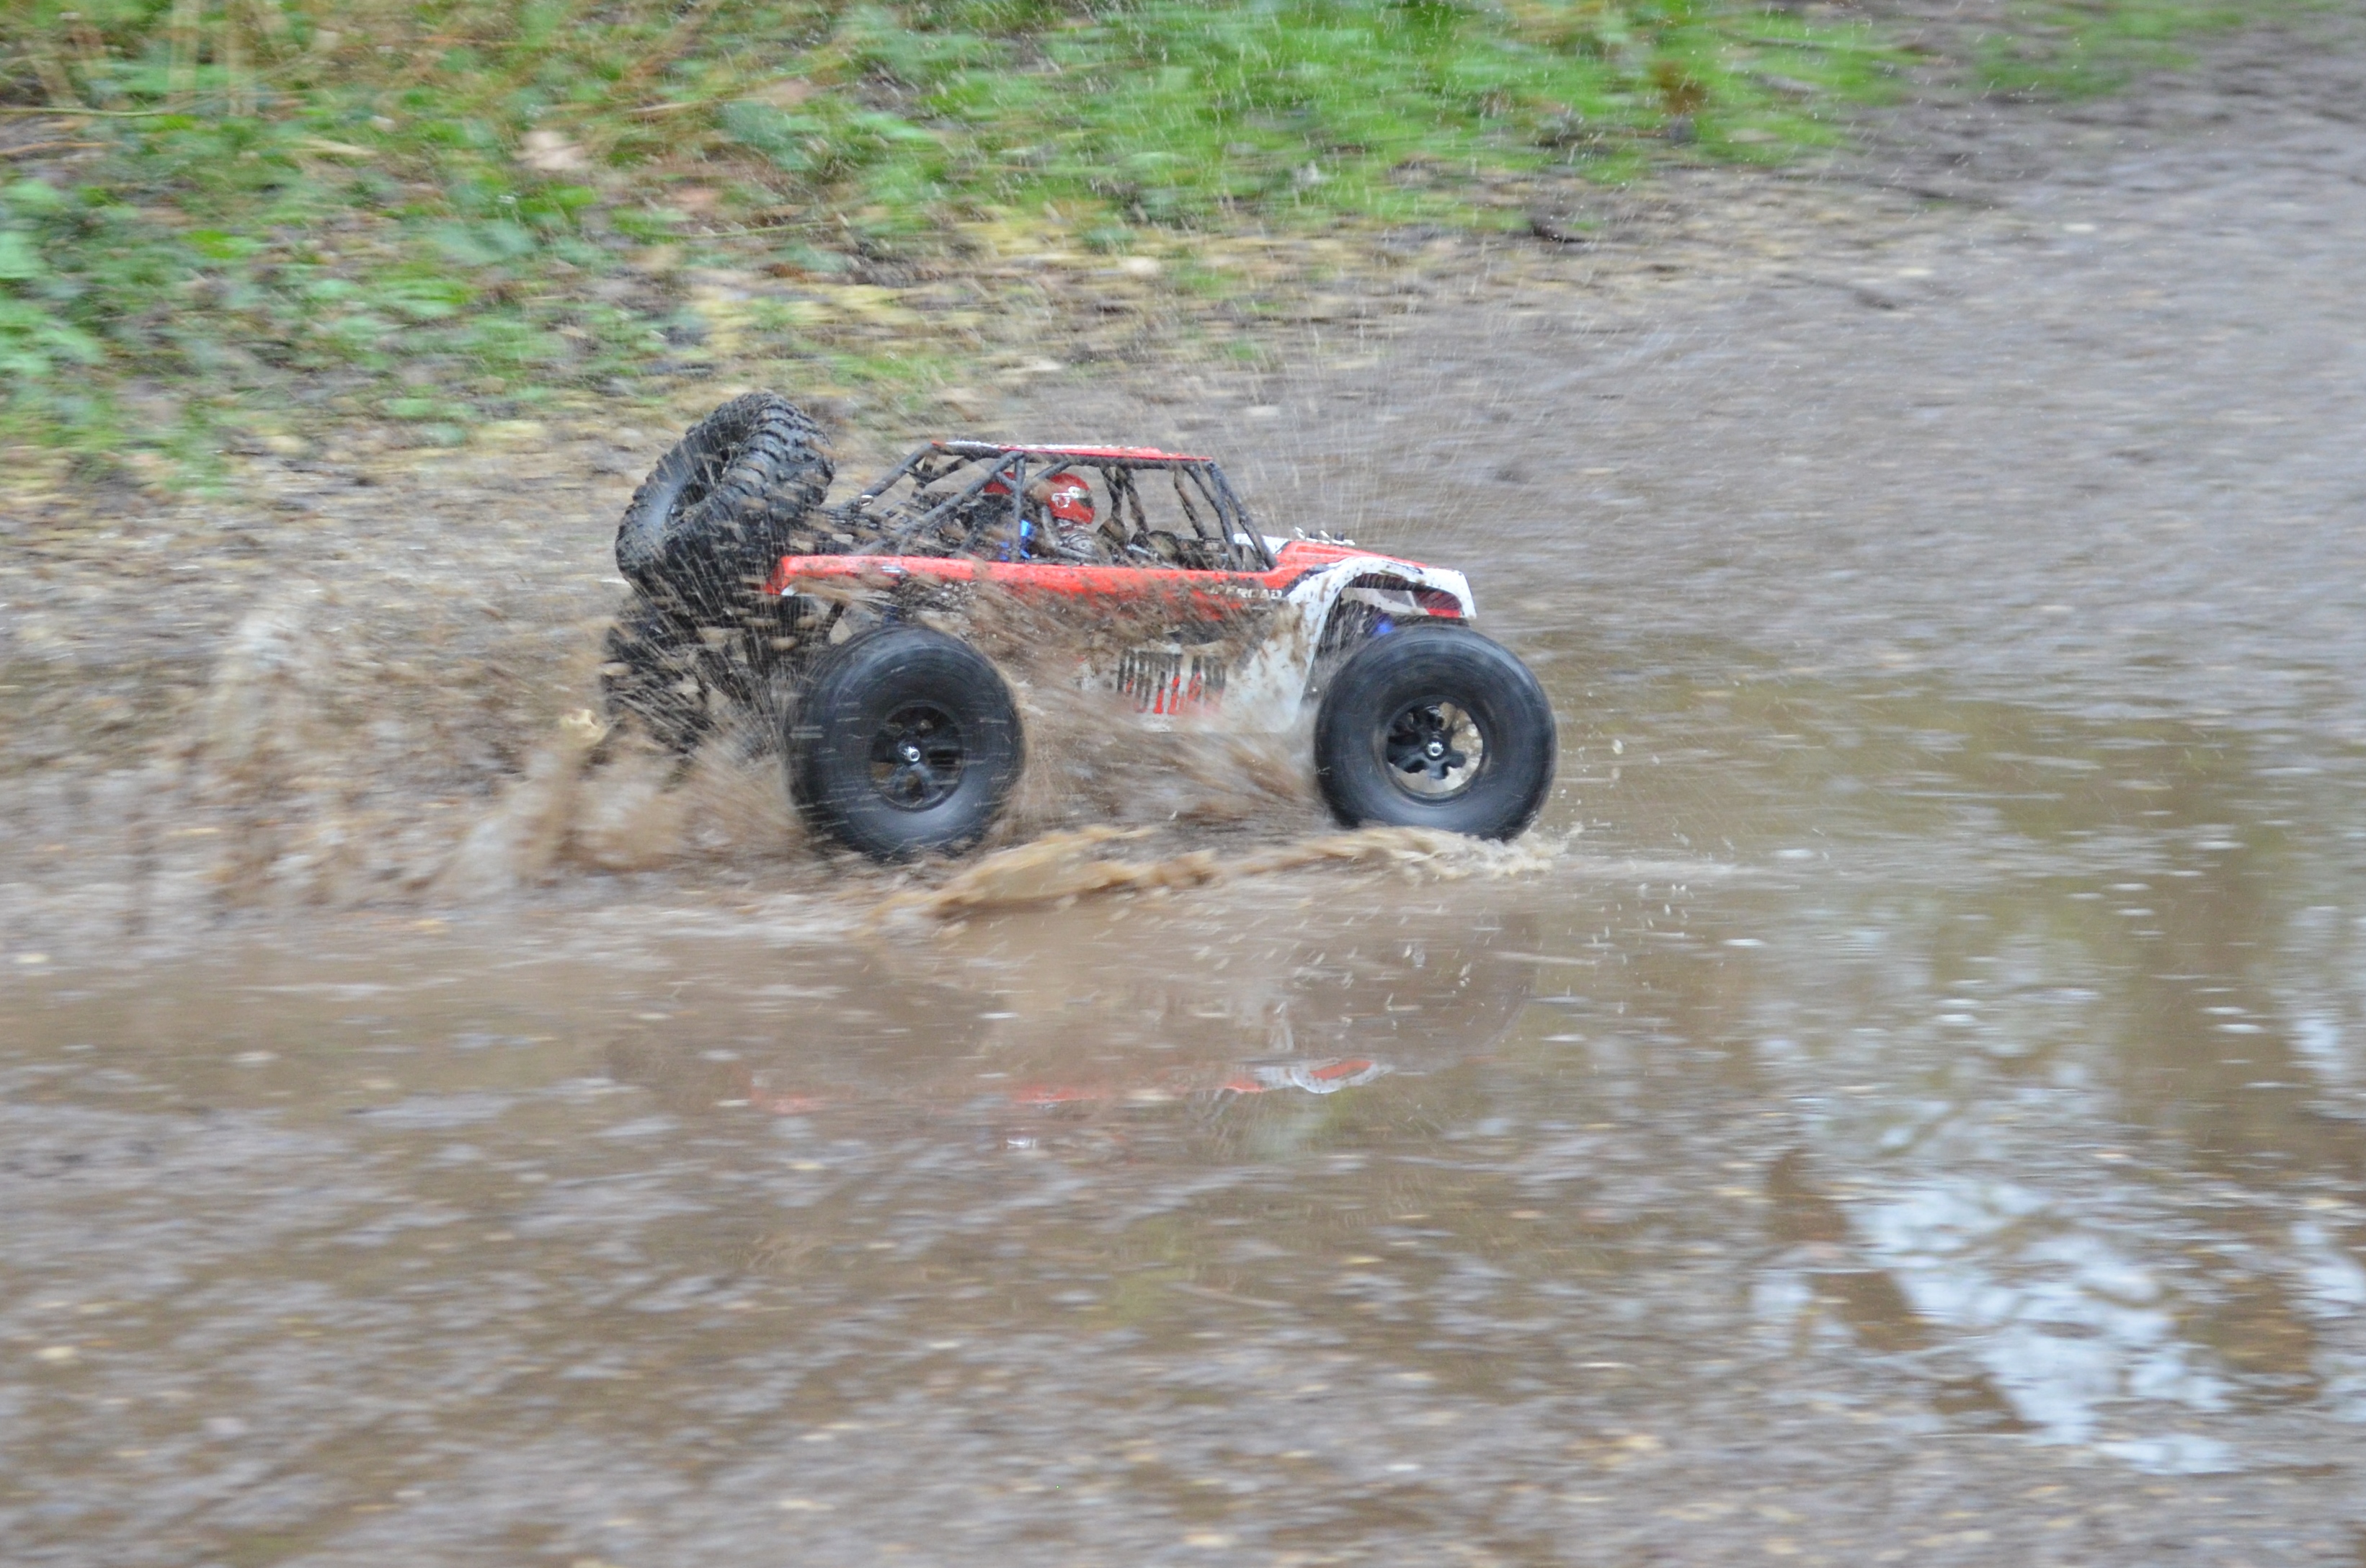 ftx rc buggy